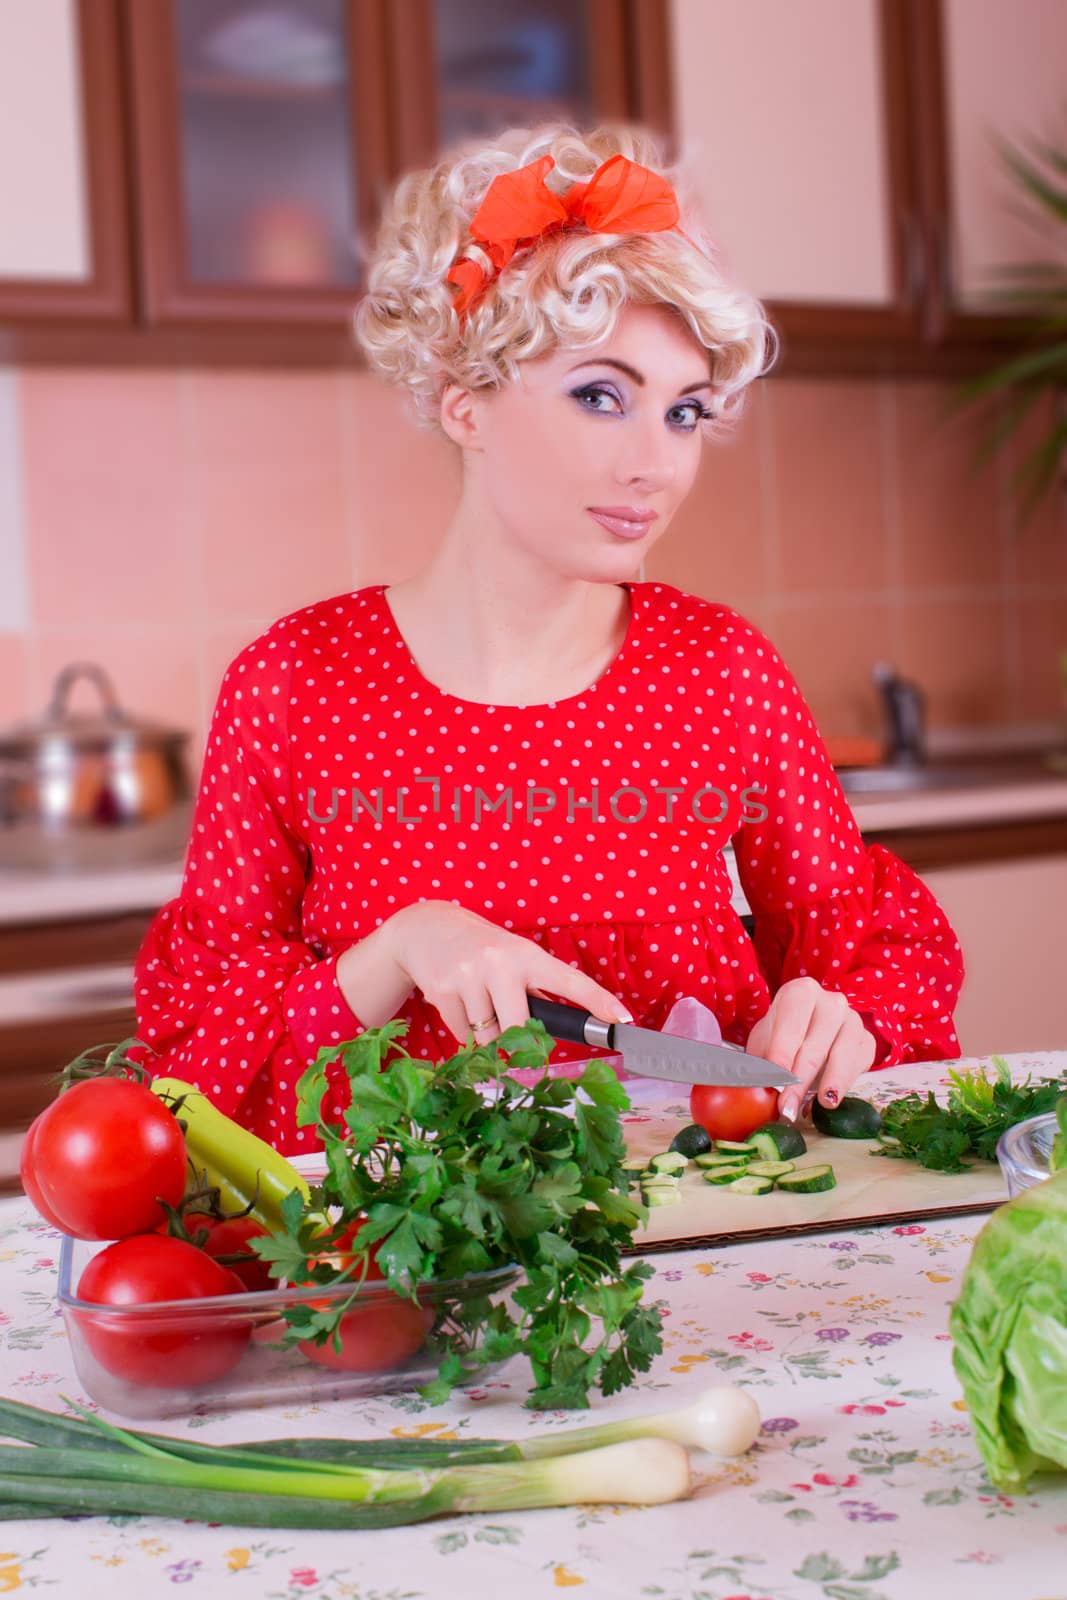 Pinup woman in red cutting vegetables in kitchen